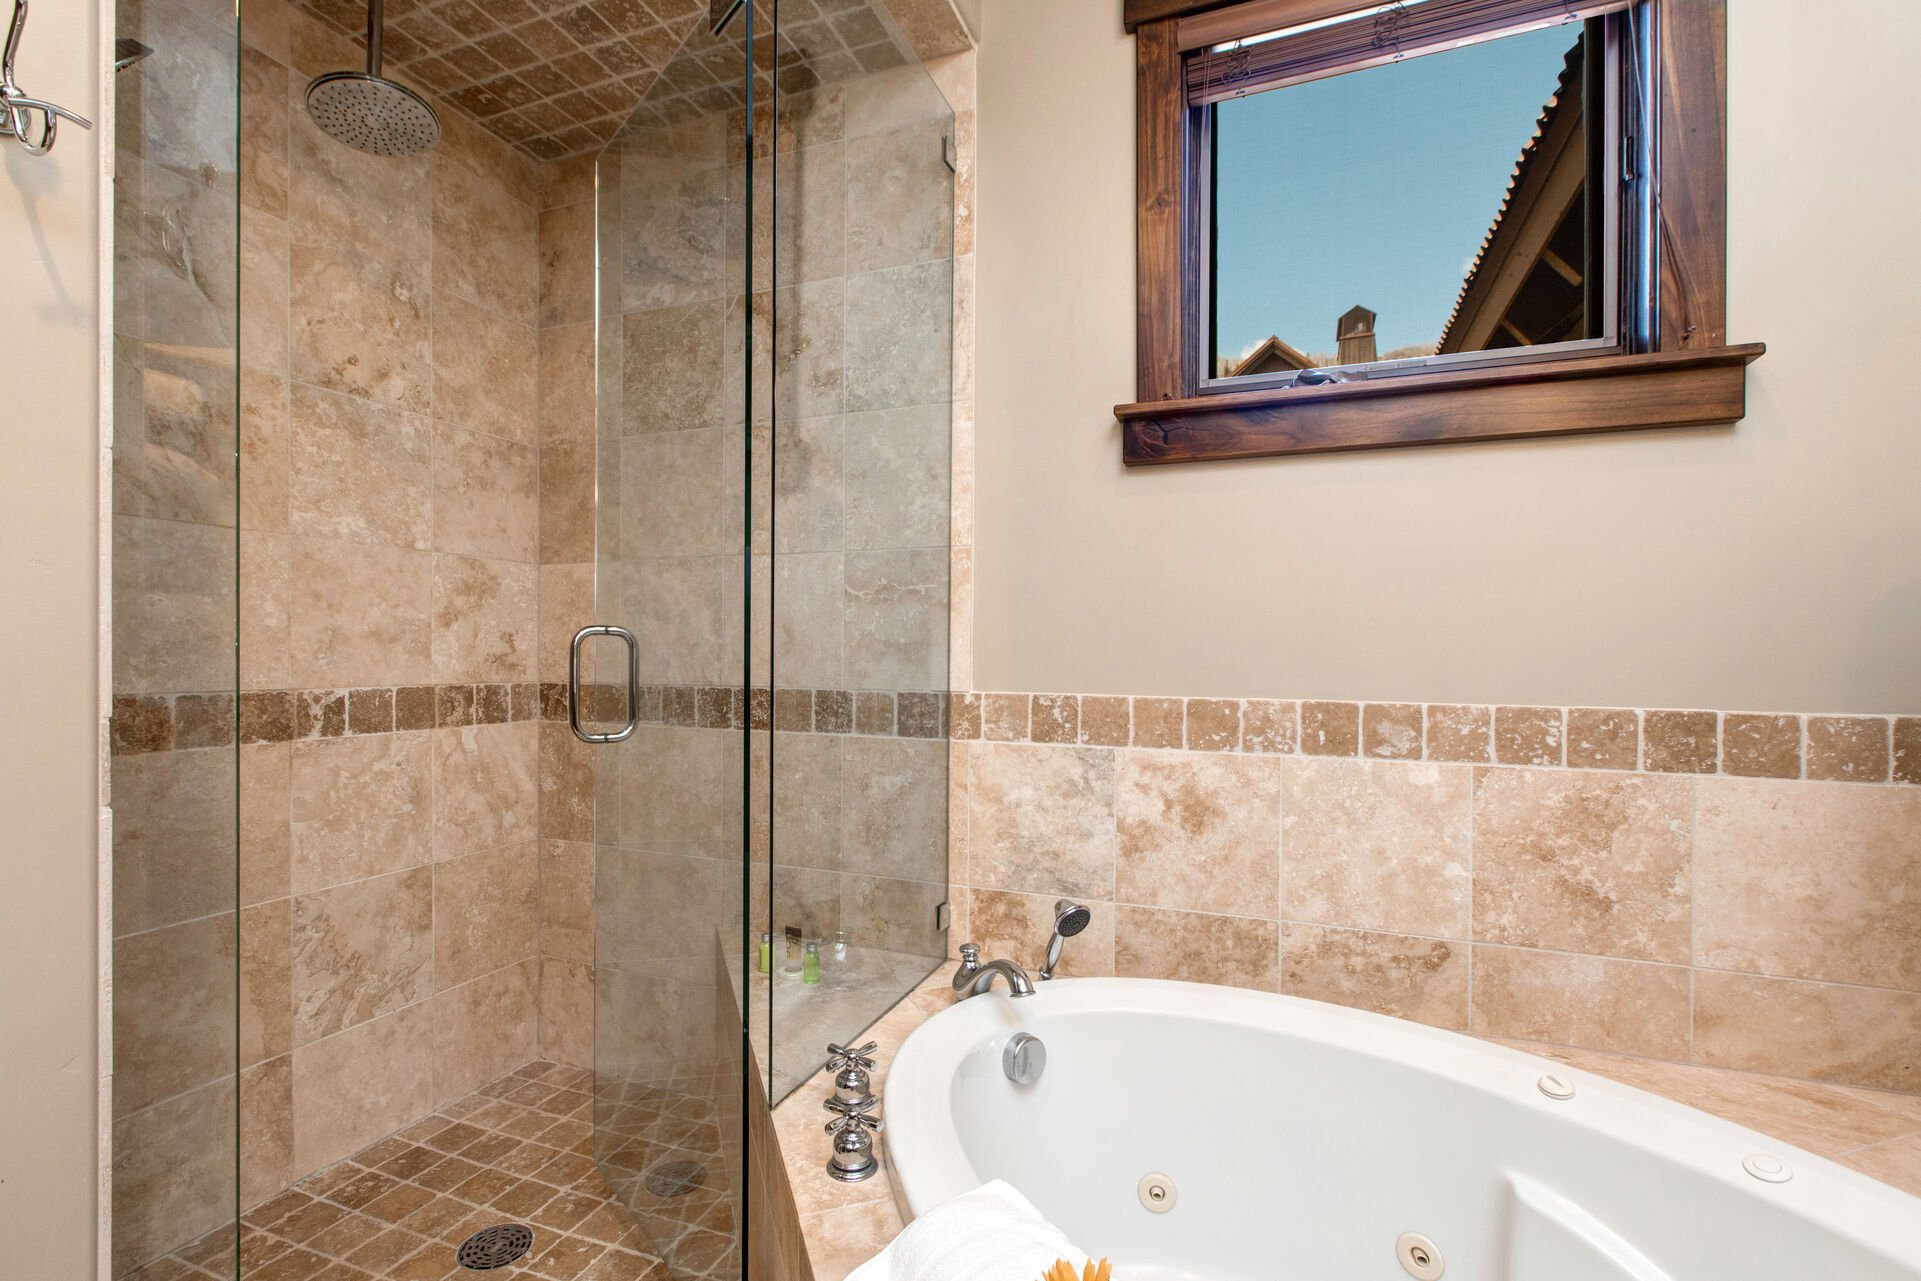 Master Bathroom with double sinks, walk-in shower, and jetted tub